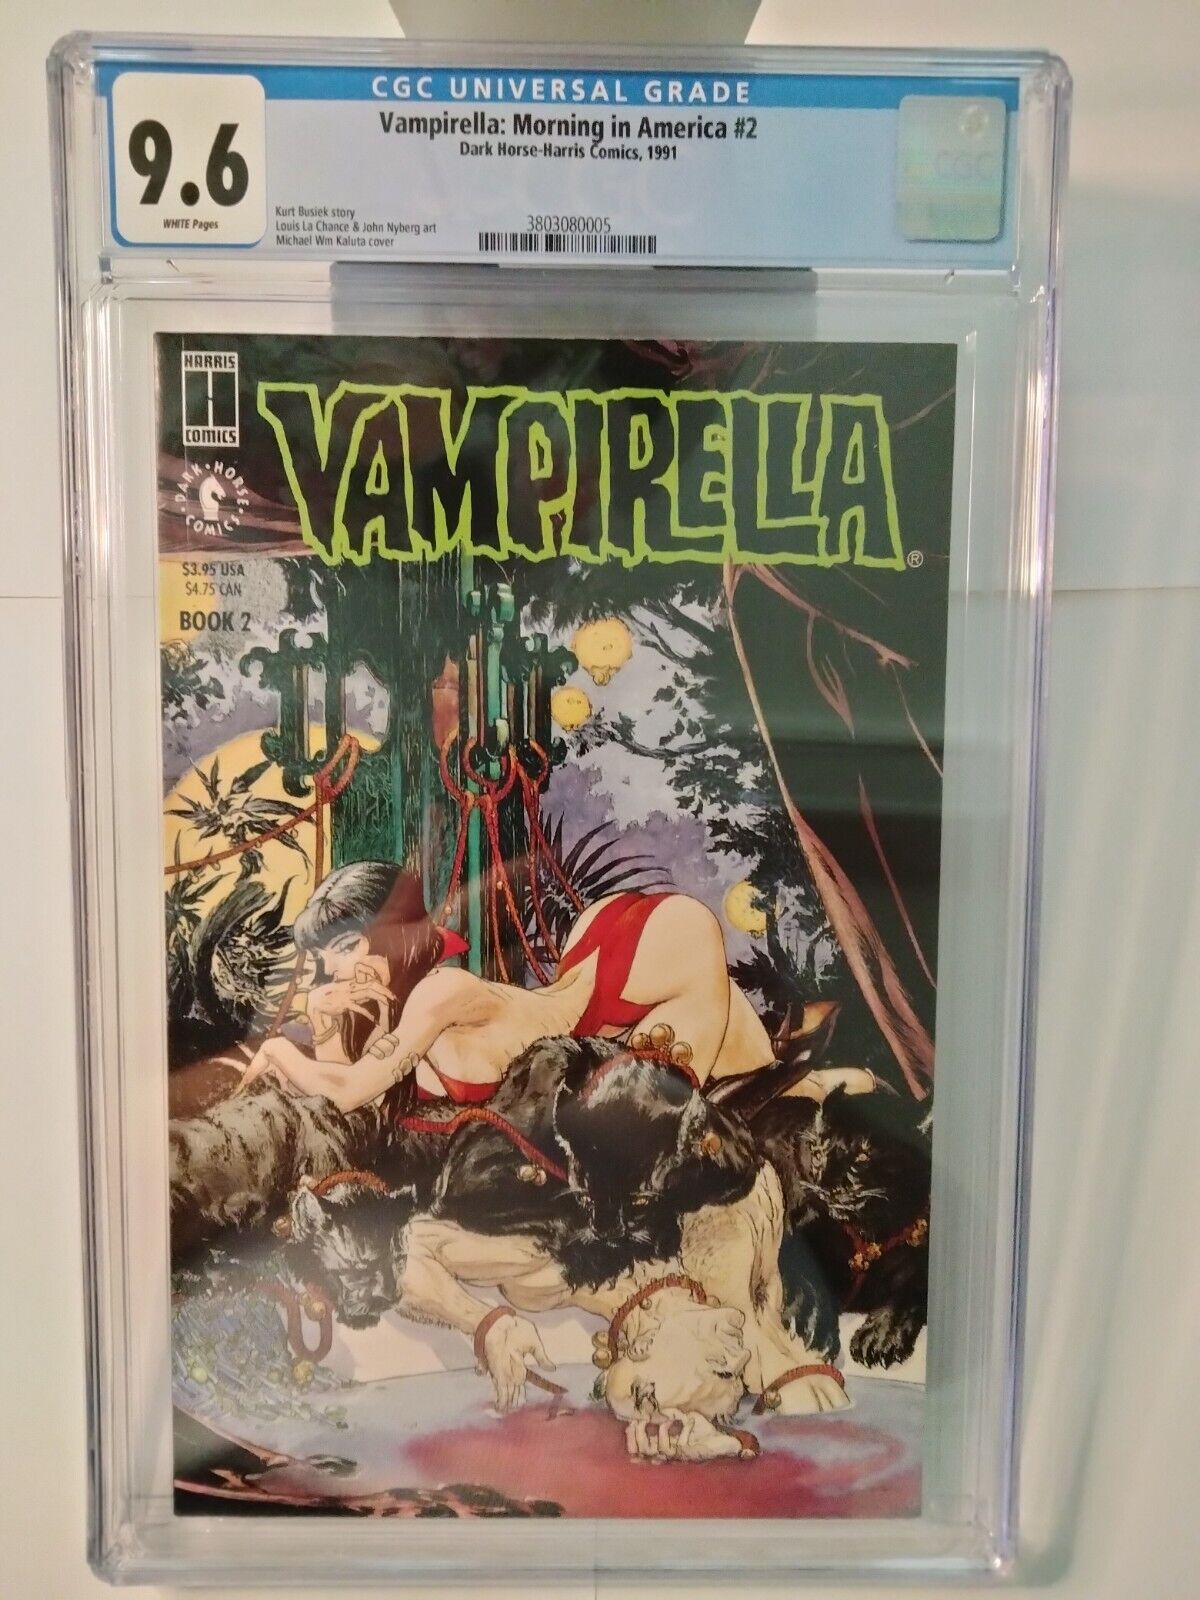 Vampirella: Morning in America # 2 DH-H, 1991 CGC 9.6 White Pages